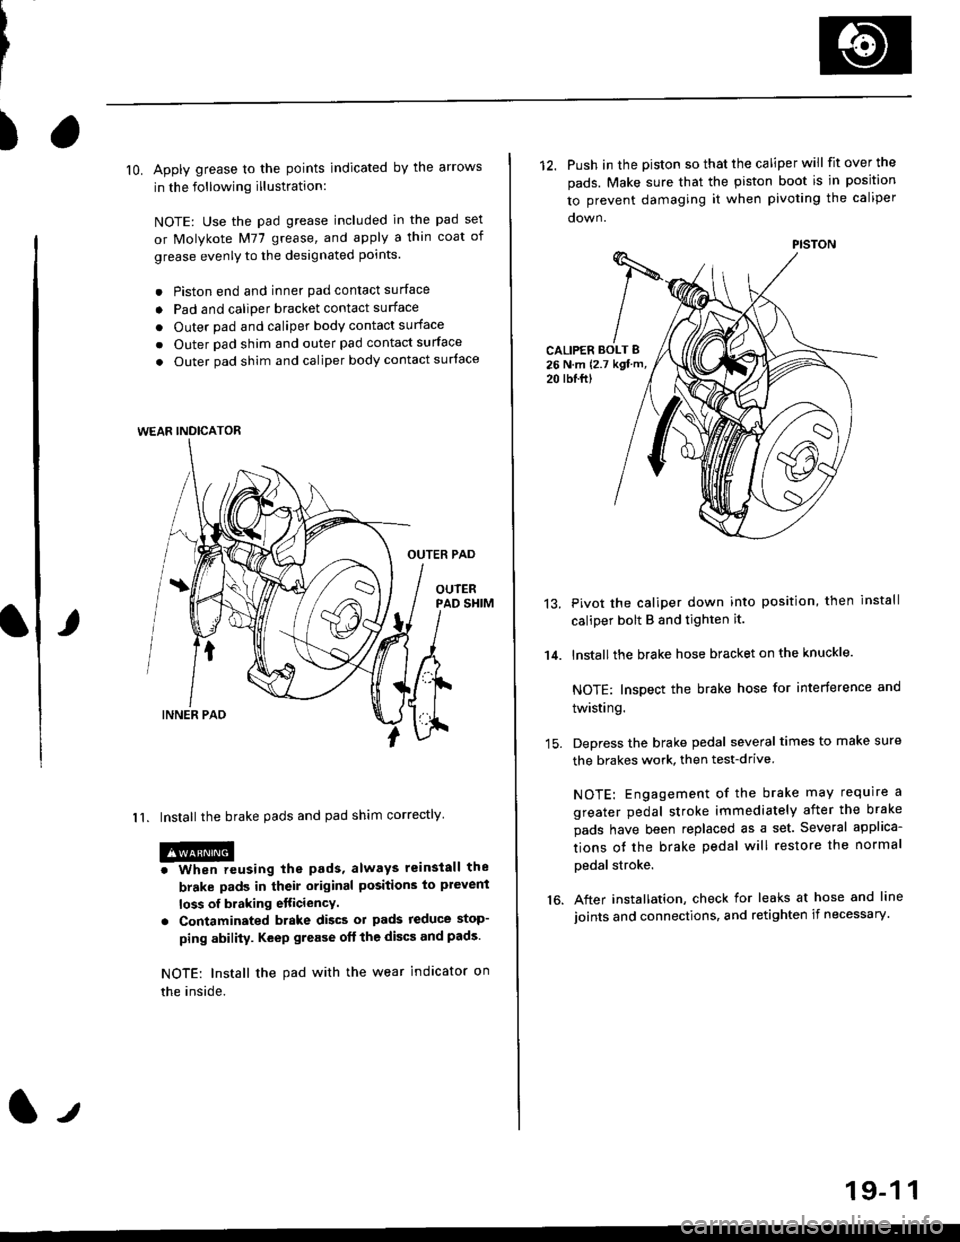 HONDA CIVIC 1996 6.G Workshop Manual )
lO. Apply grease to the points indicated by the arrows
in the following illustration:
NOTE: Use the pad grease included in the pad set
or Molykote M77 grease, and apply a thin coat of
grease evenly 